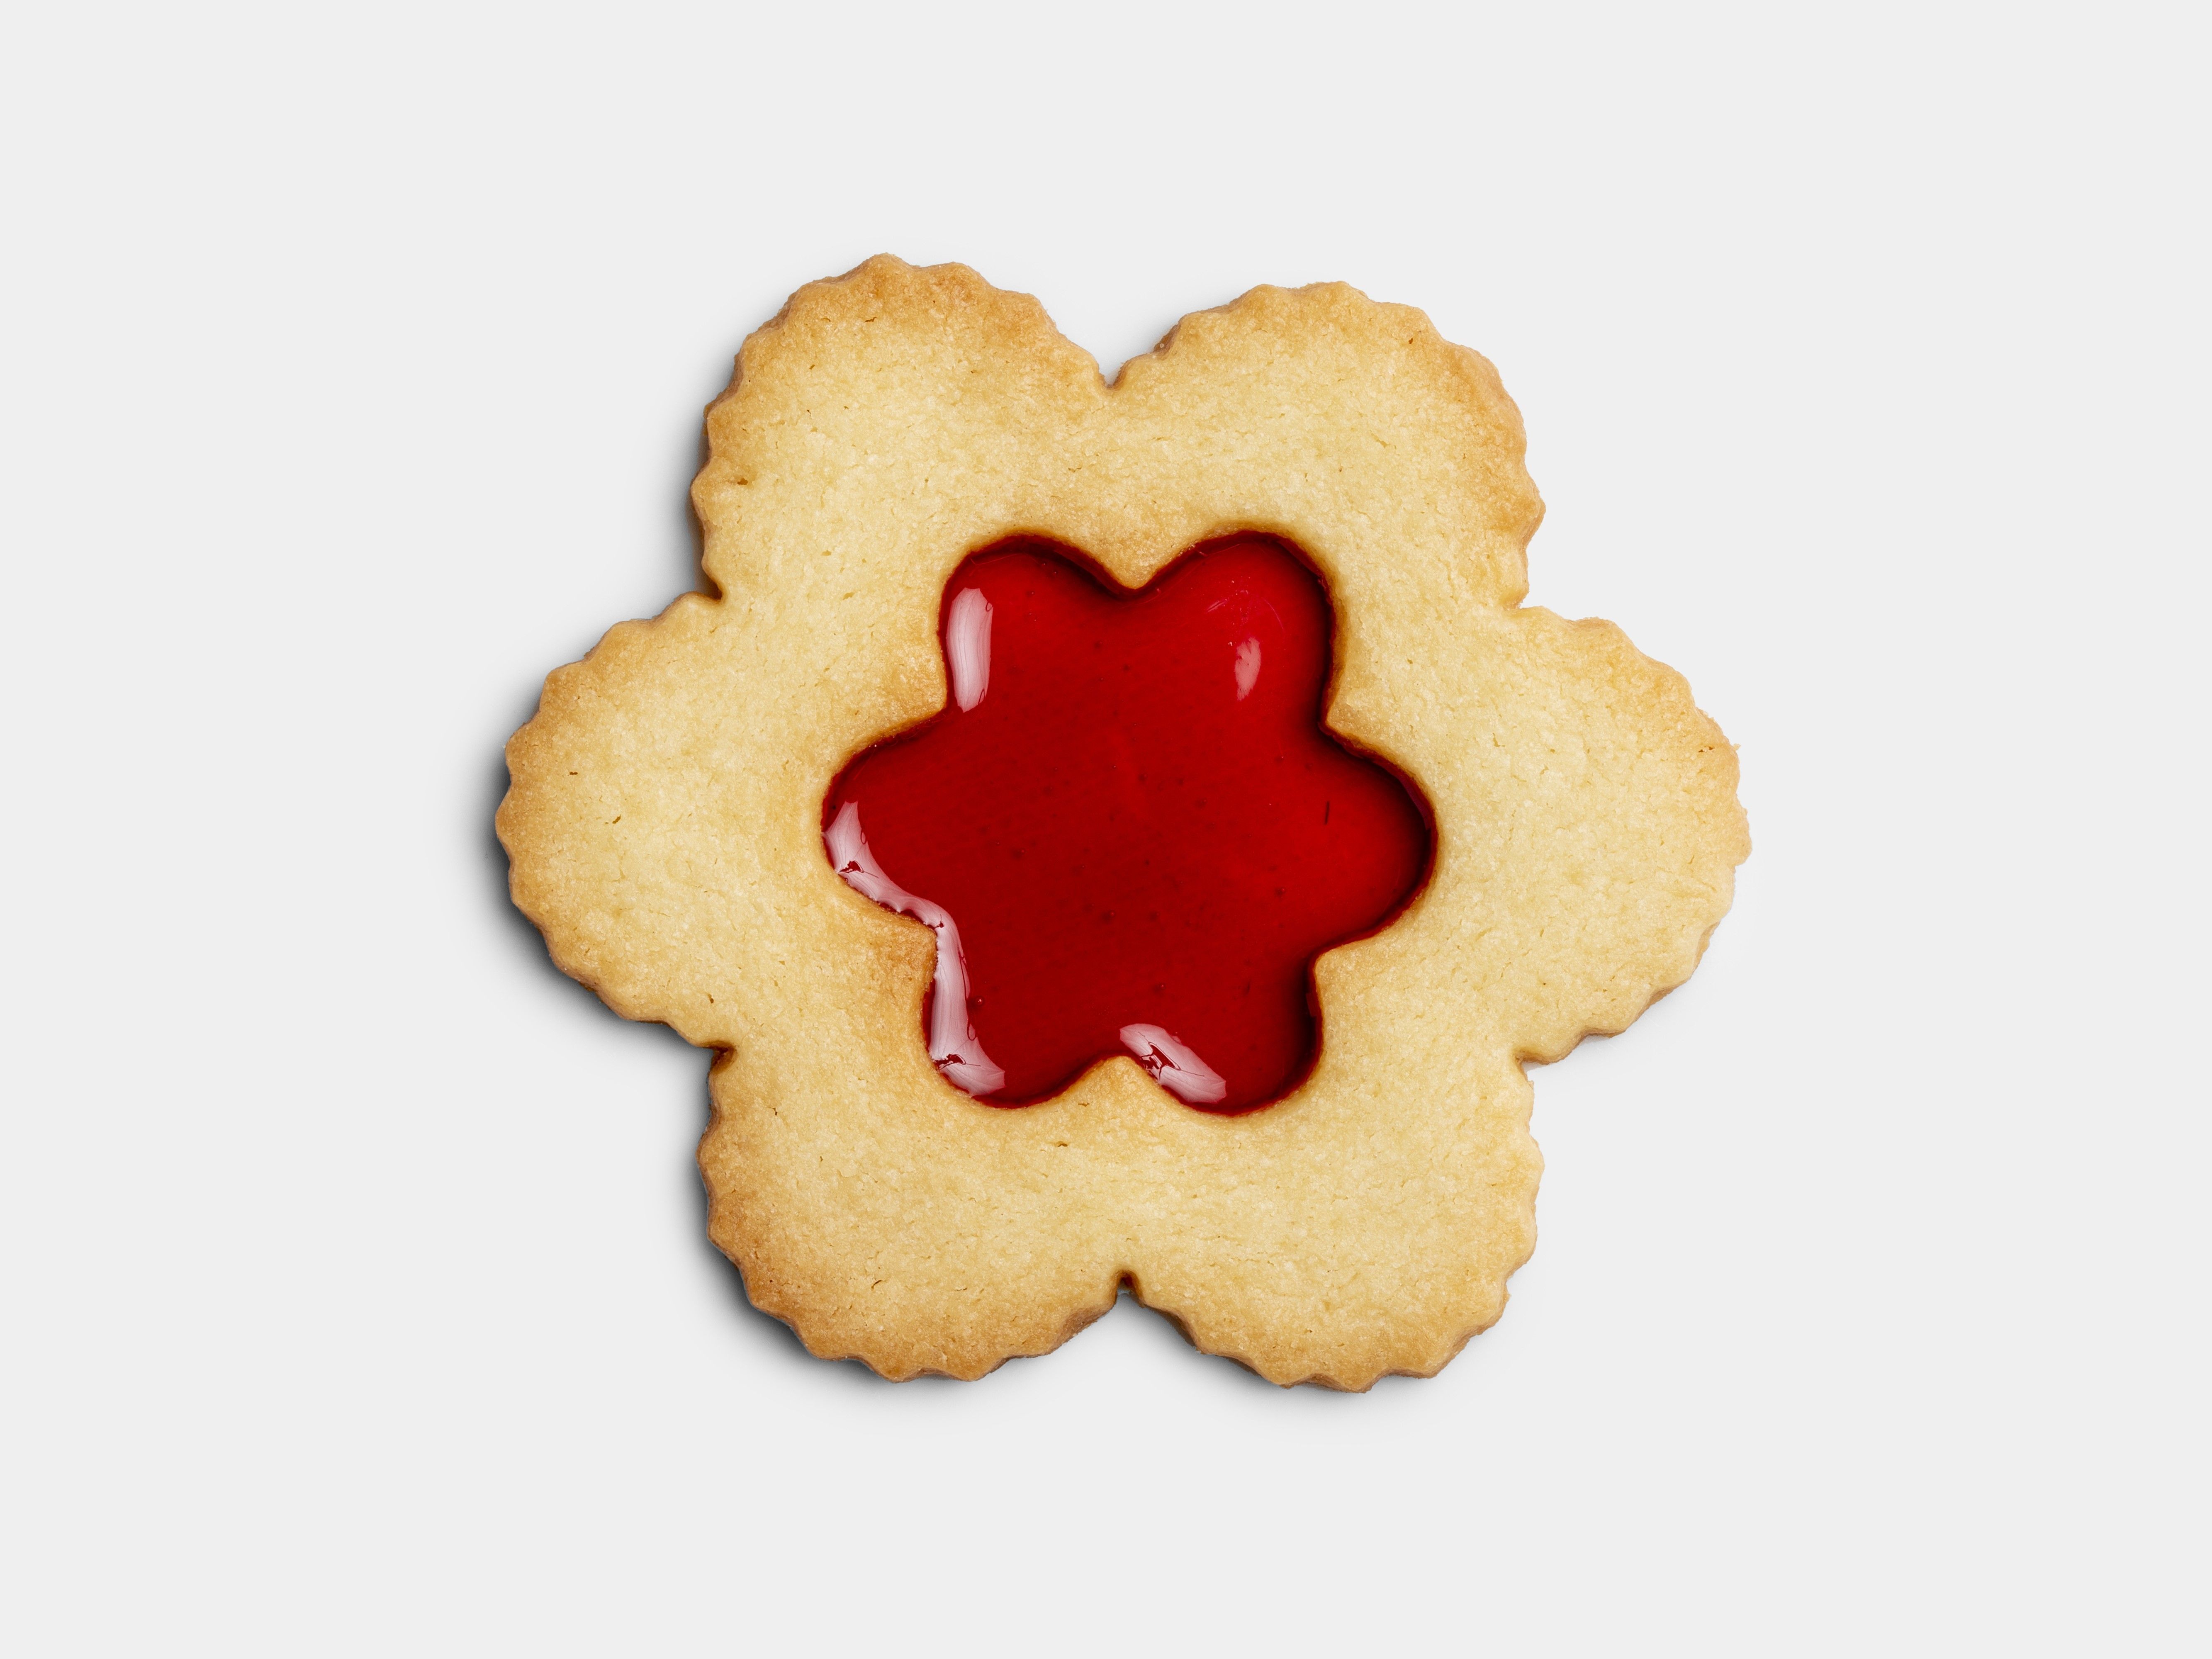 Flower shaped biscuit filled with jam